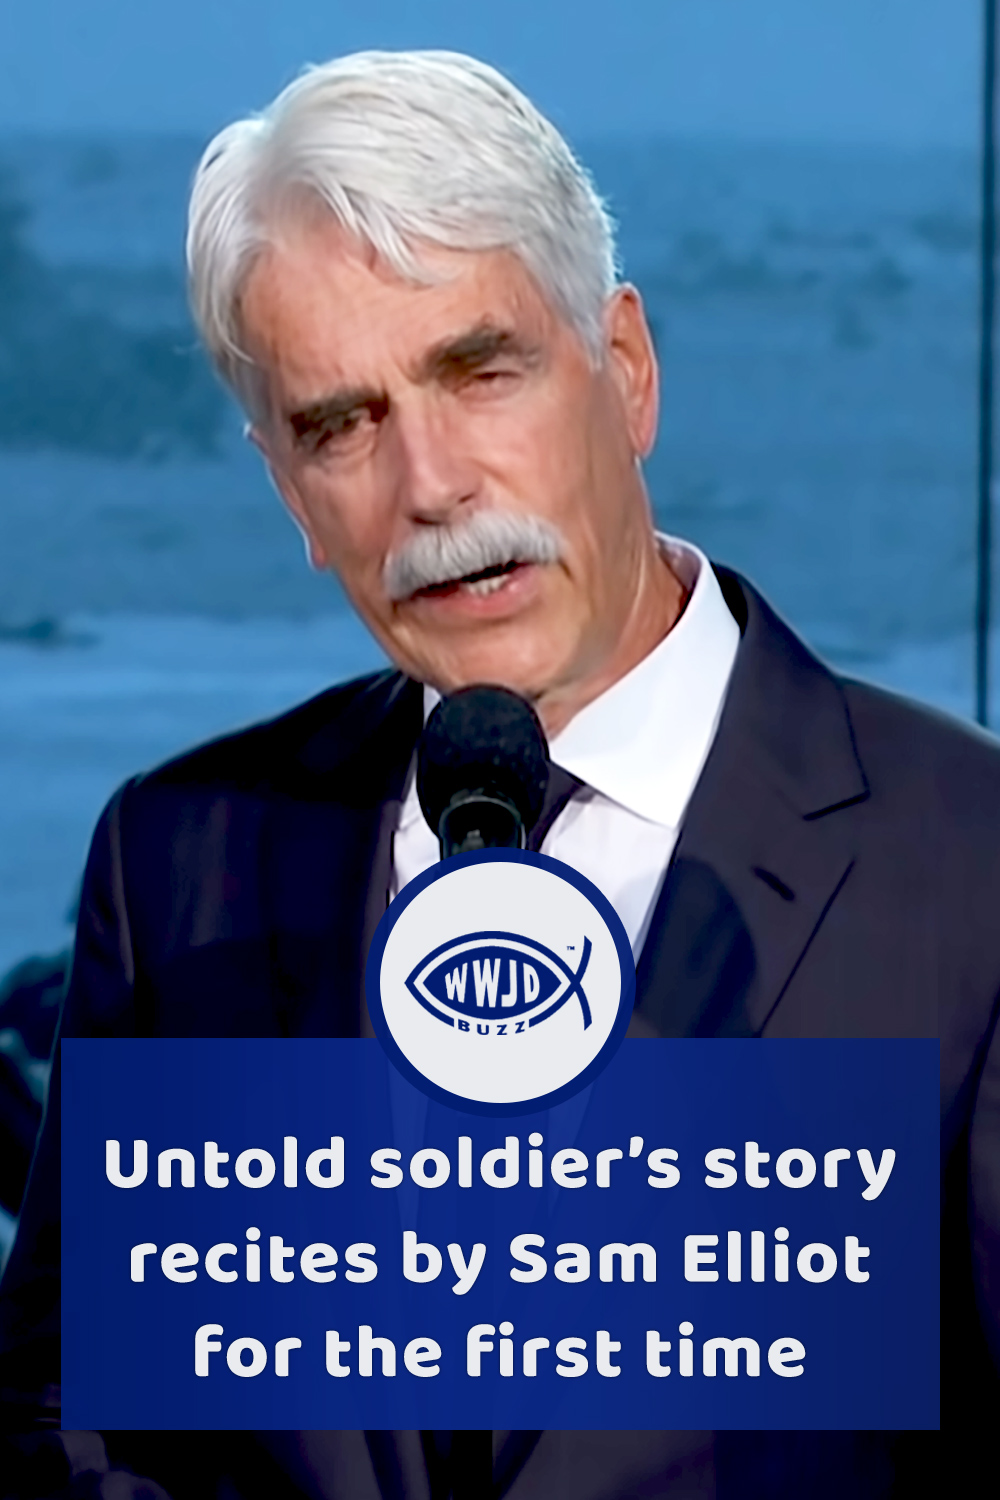 Untold soldier’s story recites by Sam Elliot for the first time